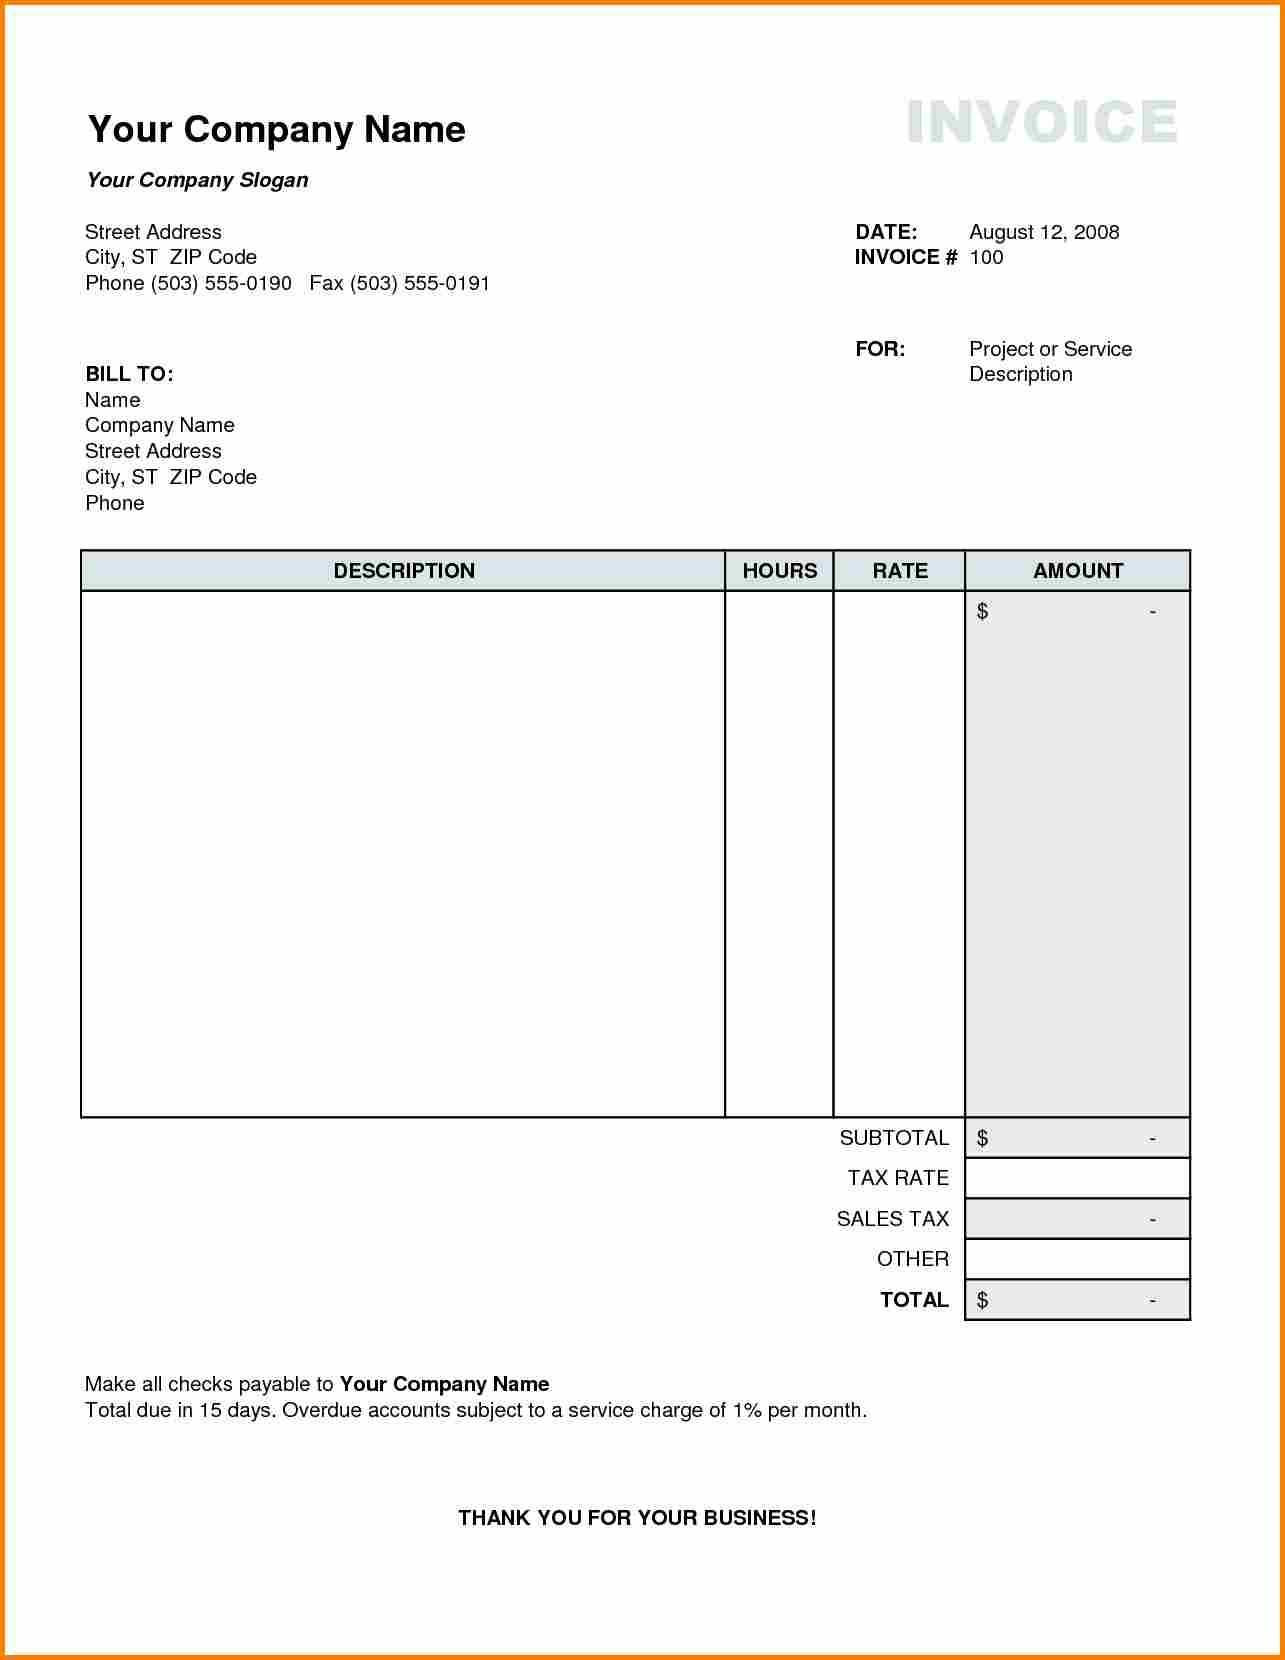 Oil Change Excel Spreadsheet Intended For Oil Change Invoice Template – Spreadsheet Collections